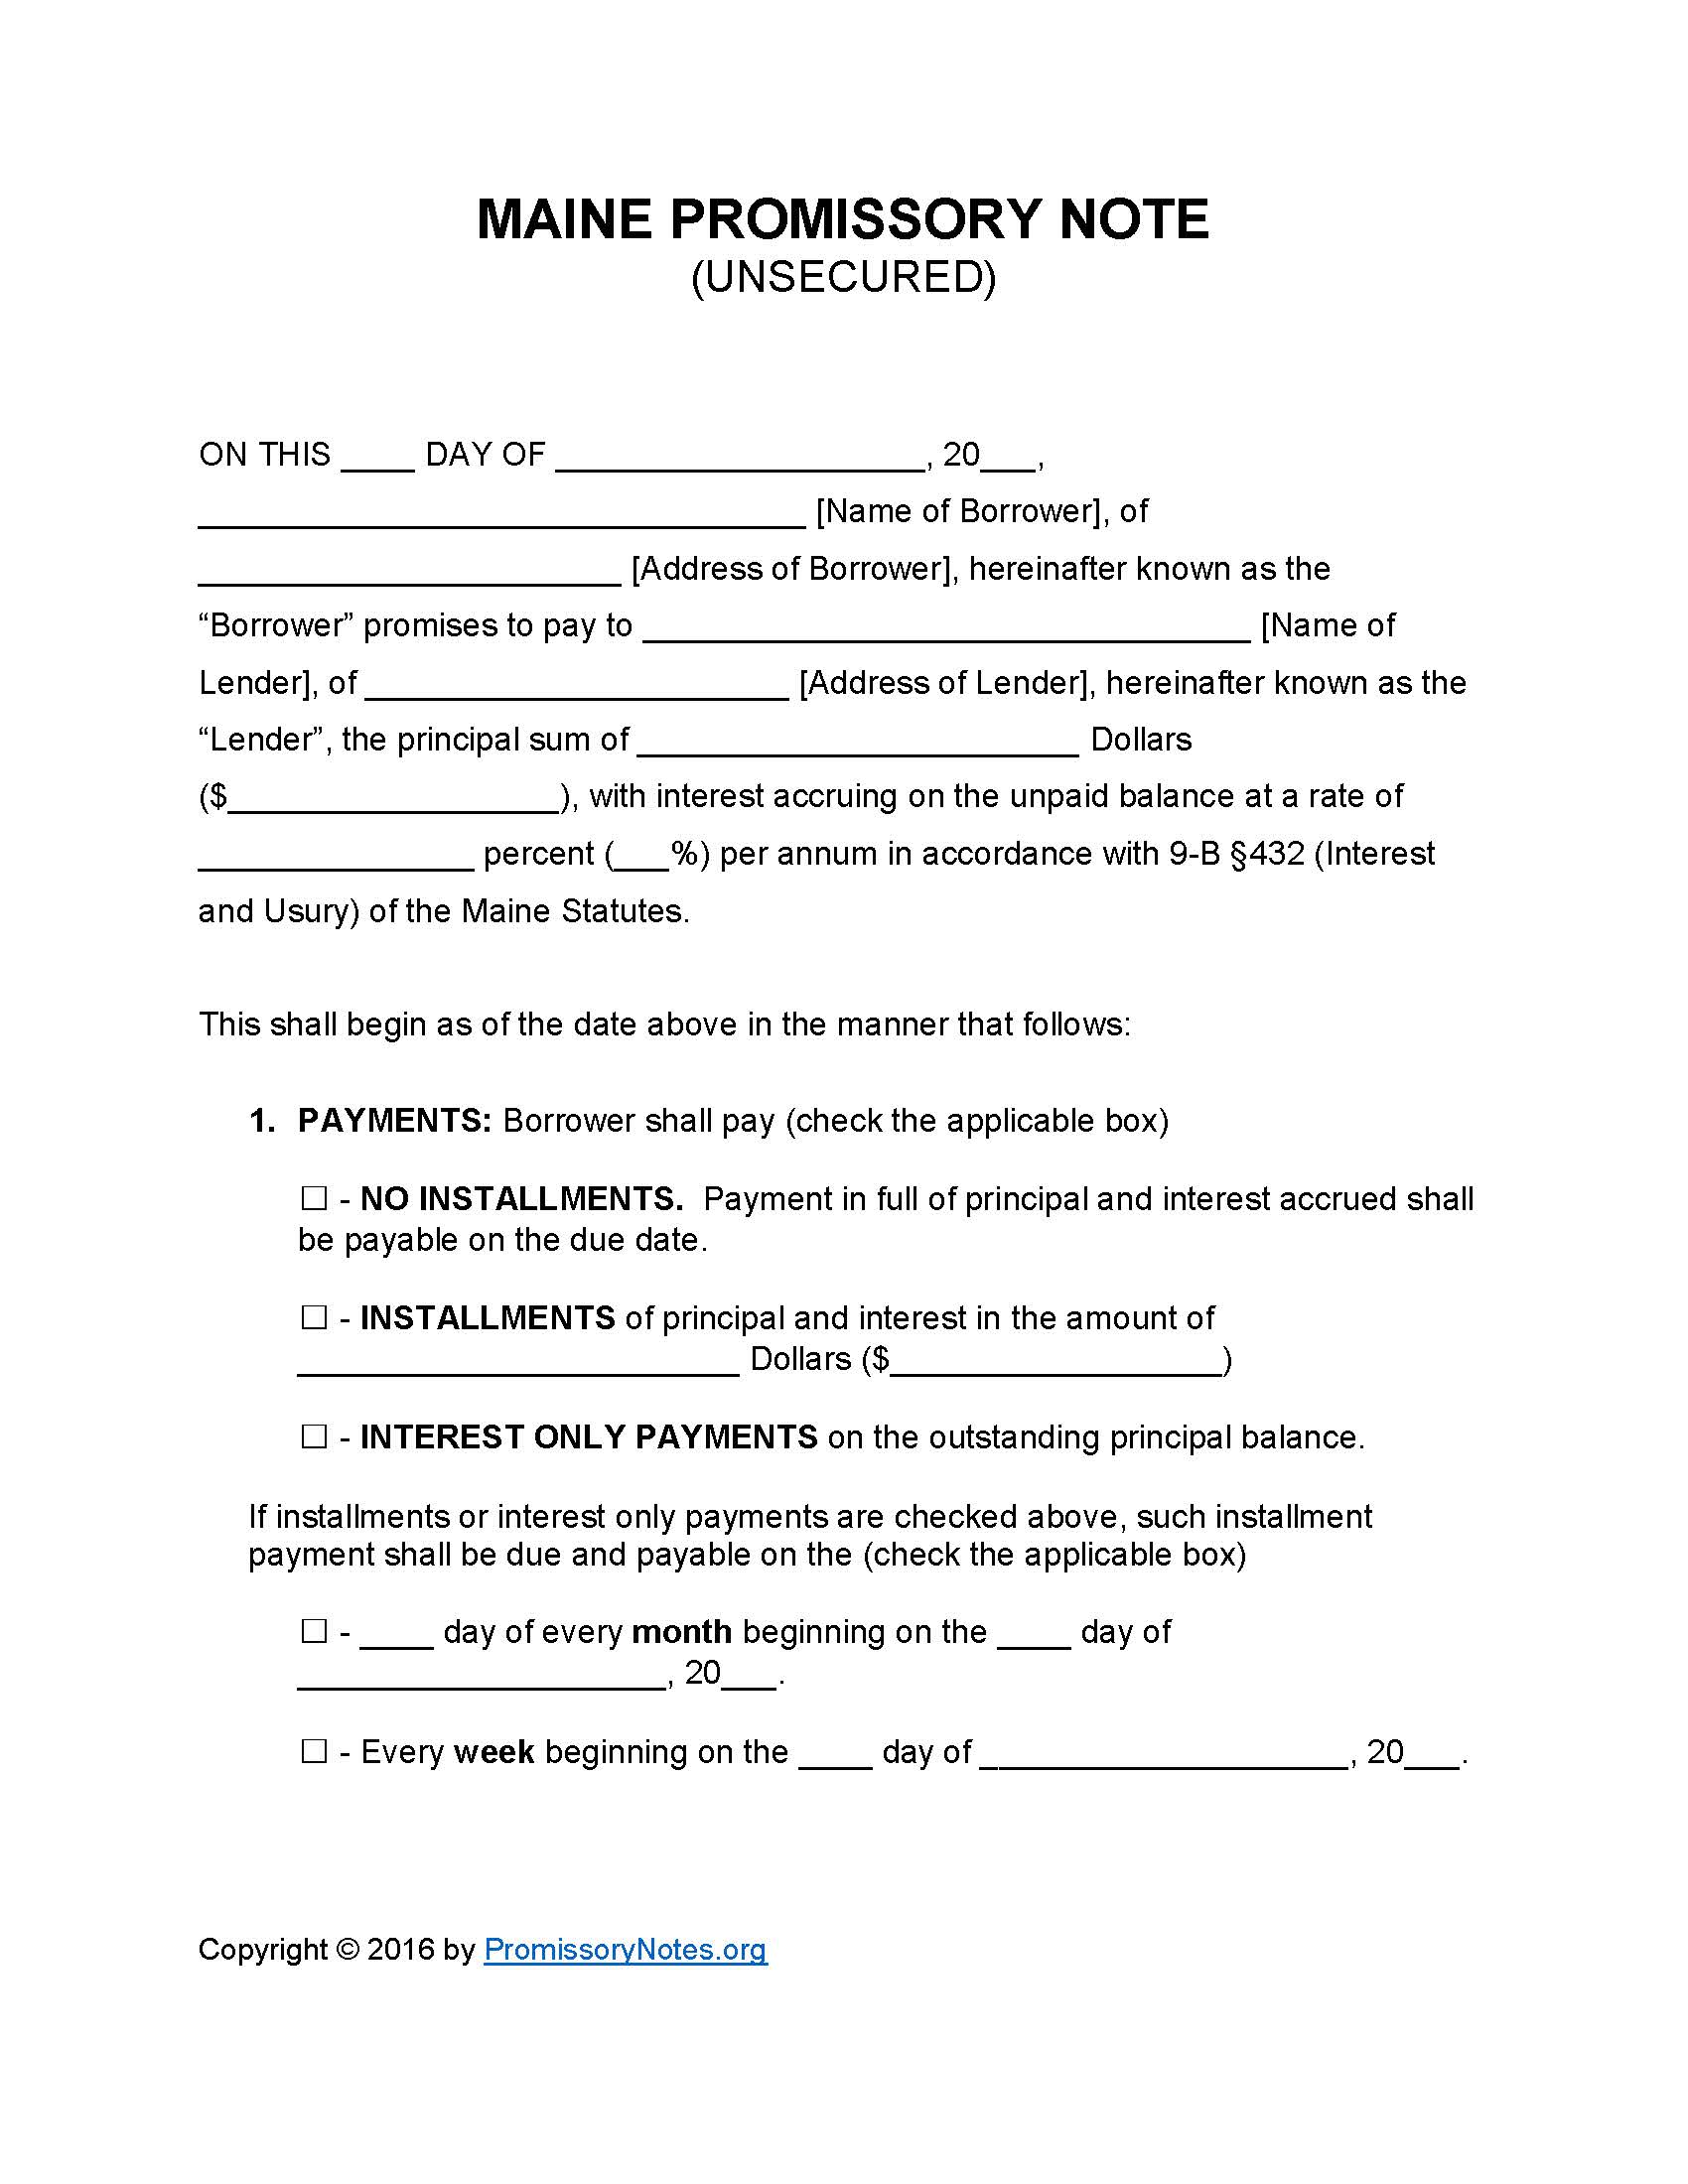 Maine Unsecured Promissory Note Template - Promissory Notes Pertaining To Promissory Notes Template